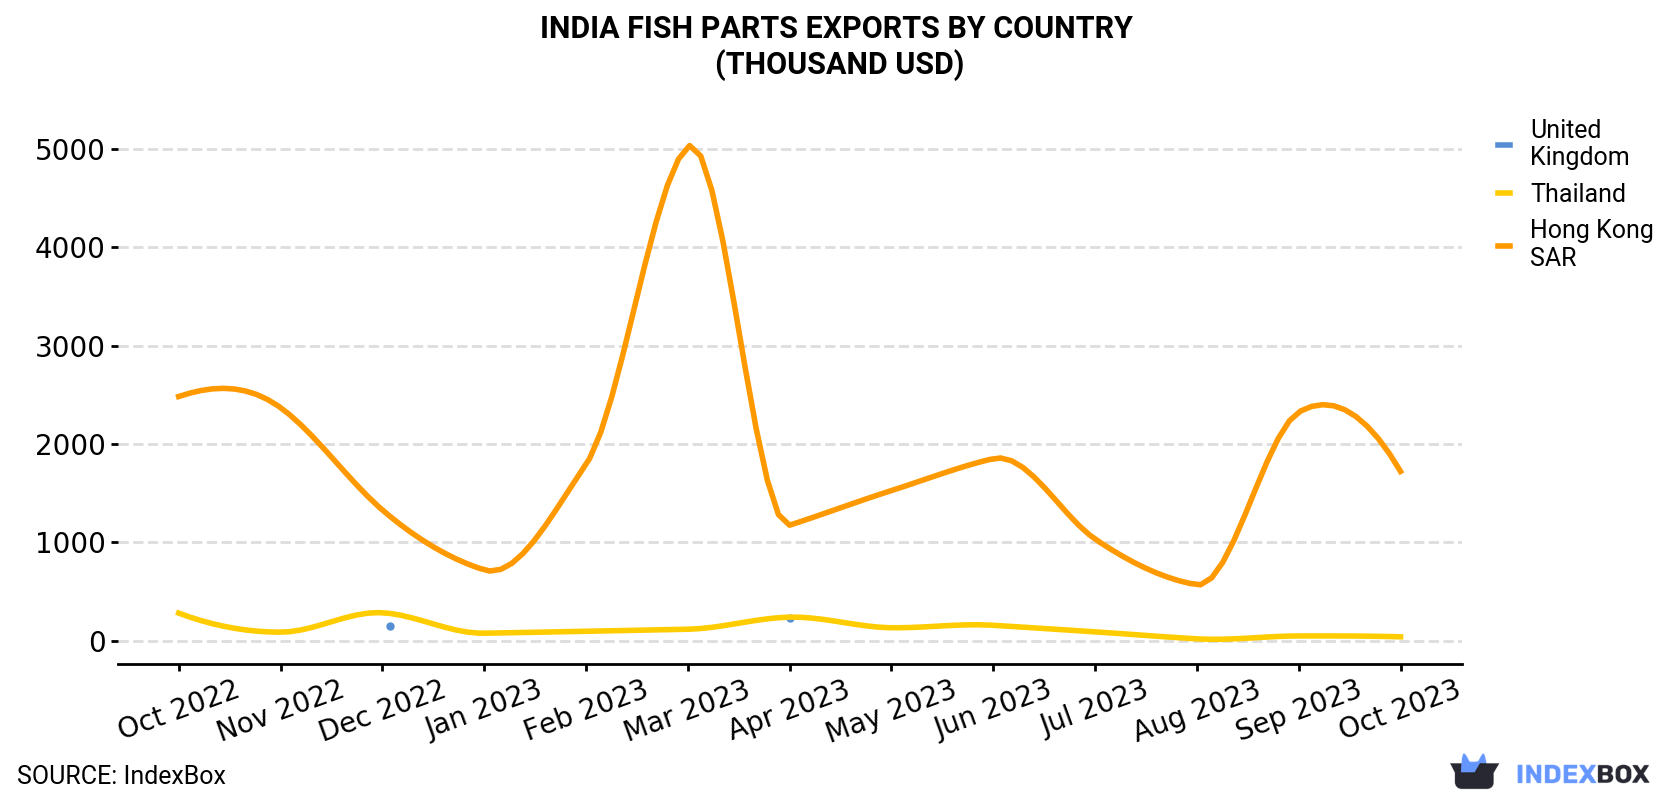 India Fish Parts Exports By Country (Thousand USD)